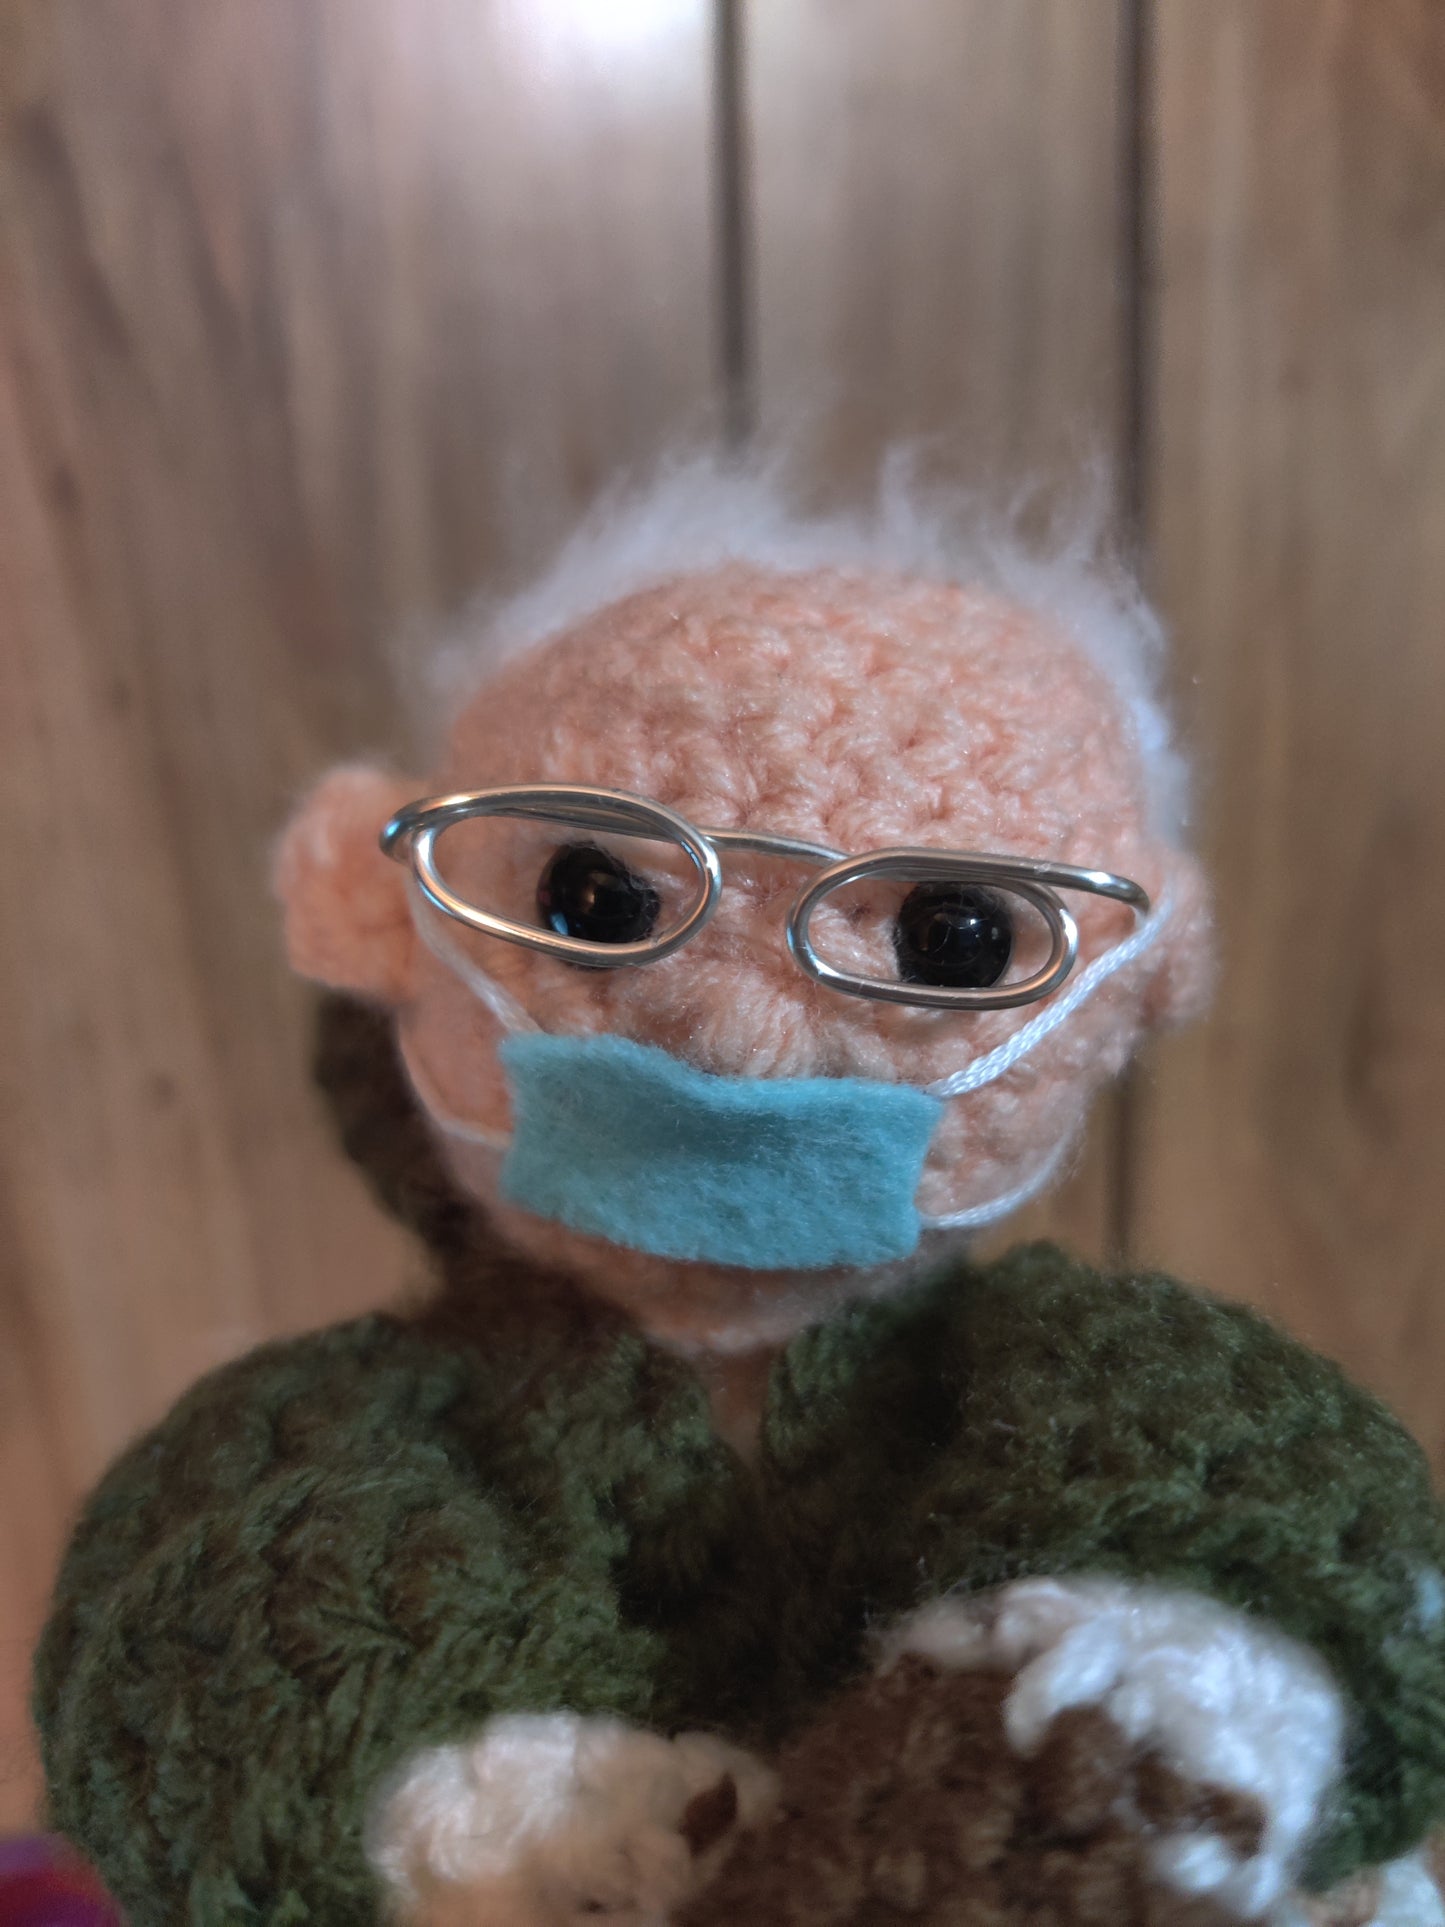 Bernie with Mittens Doll